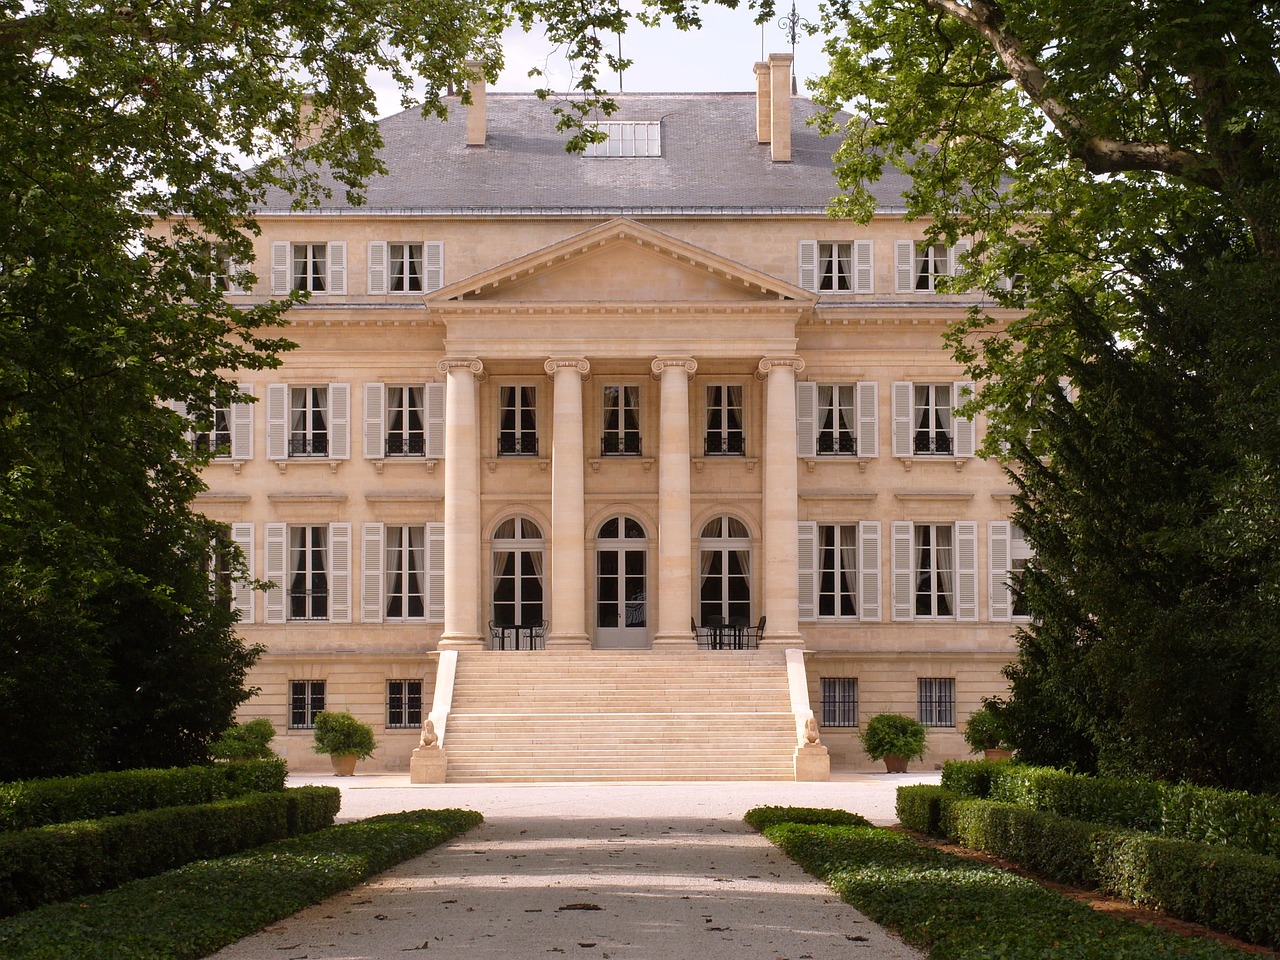 a large stone building surrounded by trees and bushes, inspired by François Barraud, flickr, paris school, beautifully symmetrical, pur champagne damery, luxury and elite, exterior view